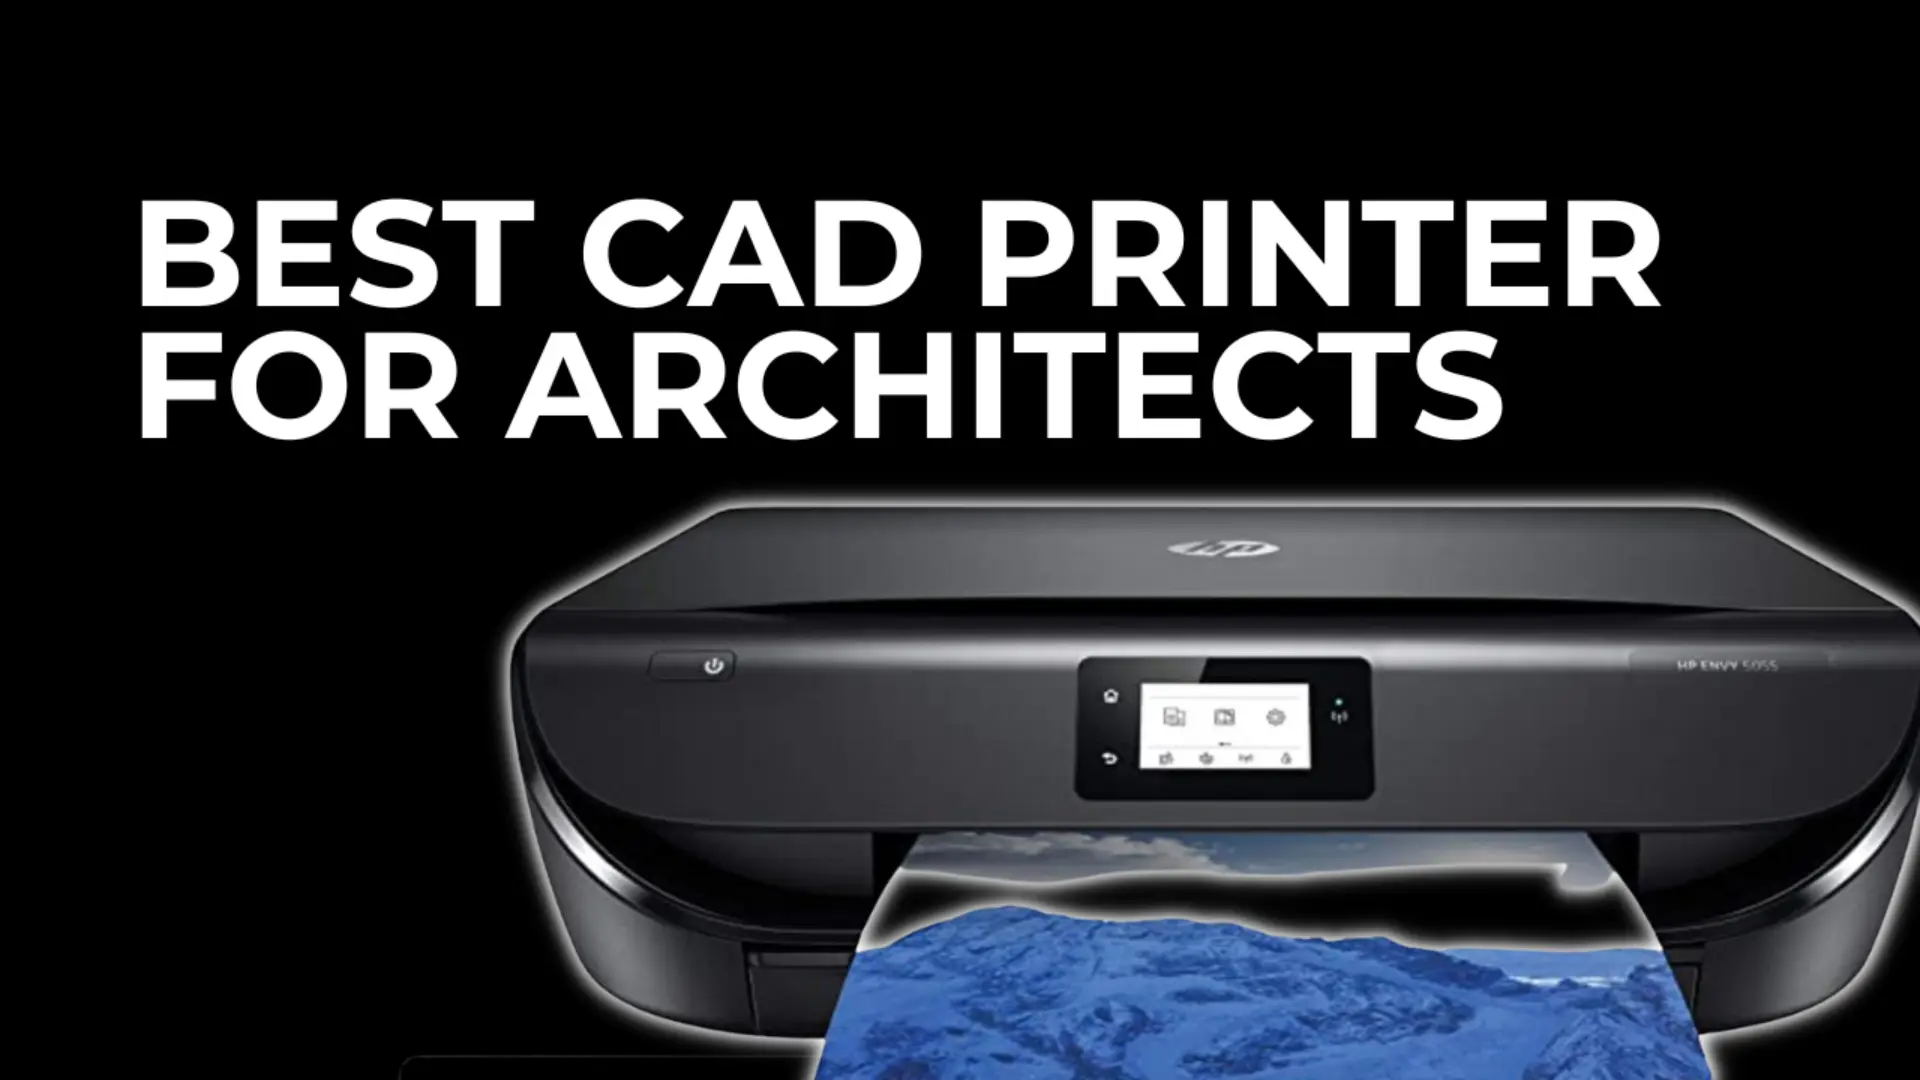 Best cad printer for architects